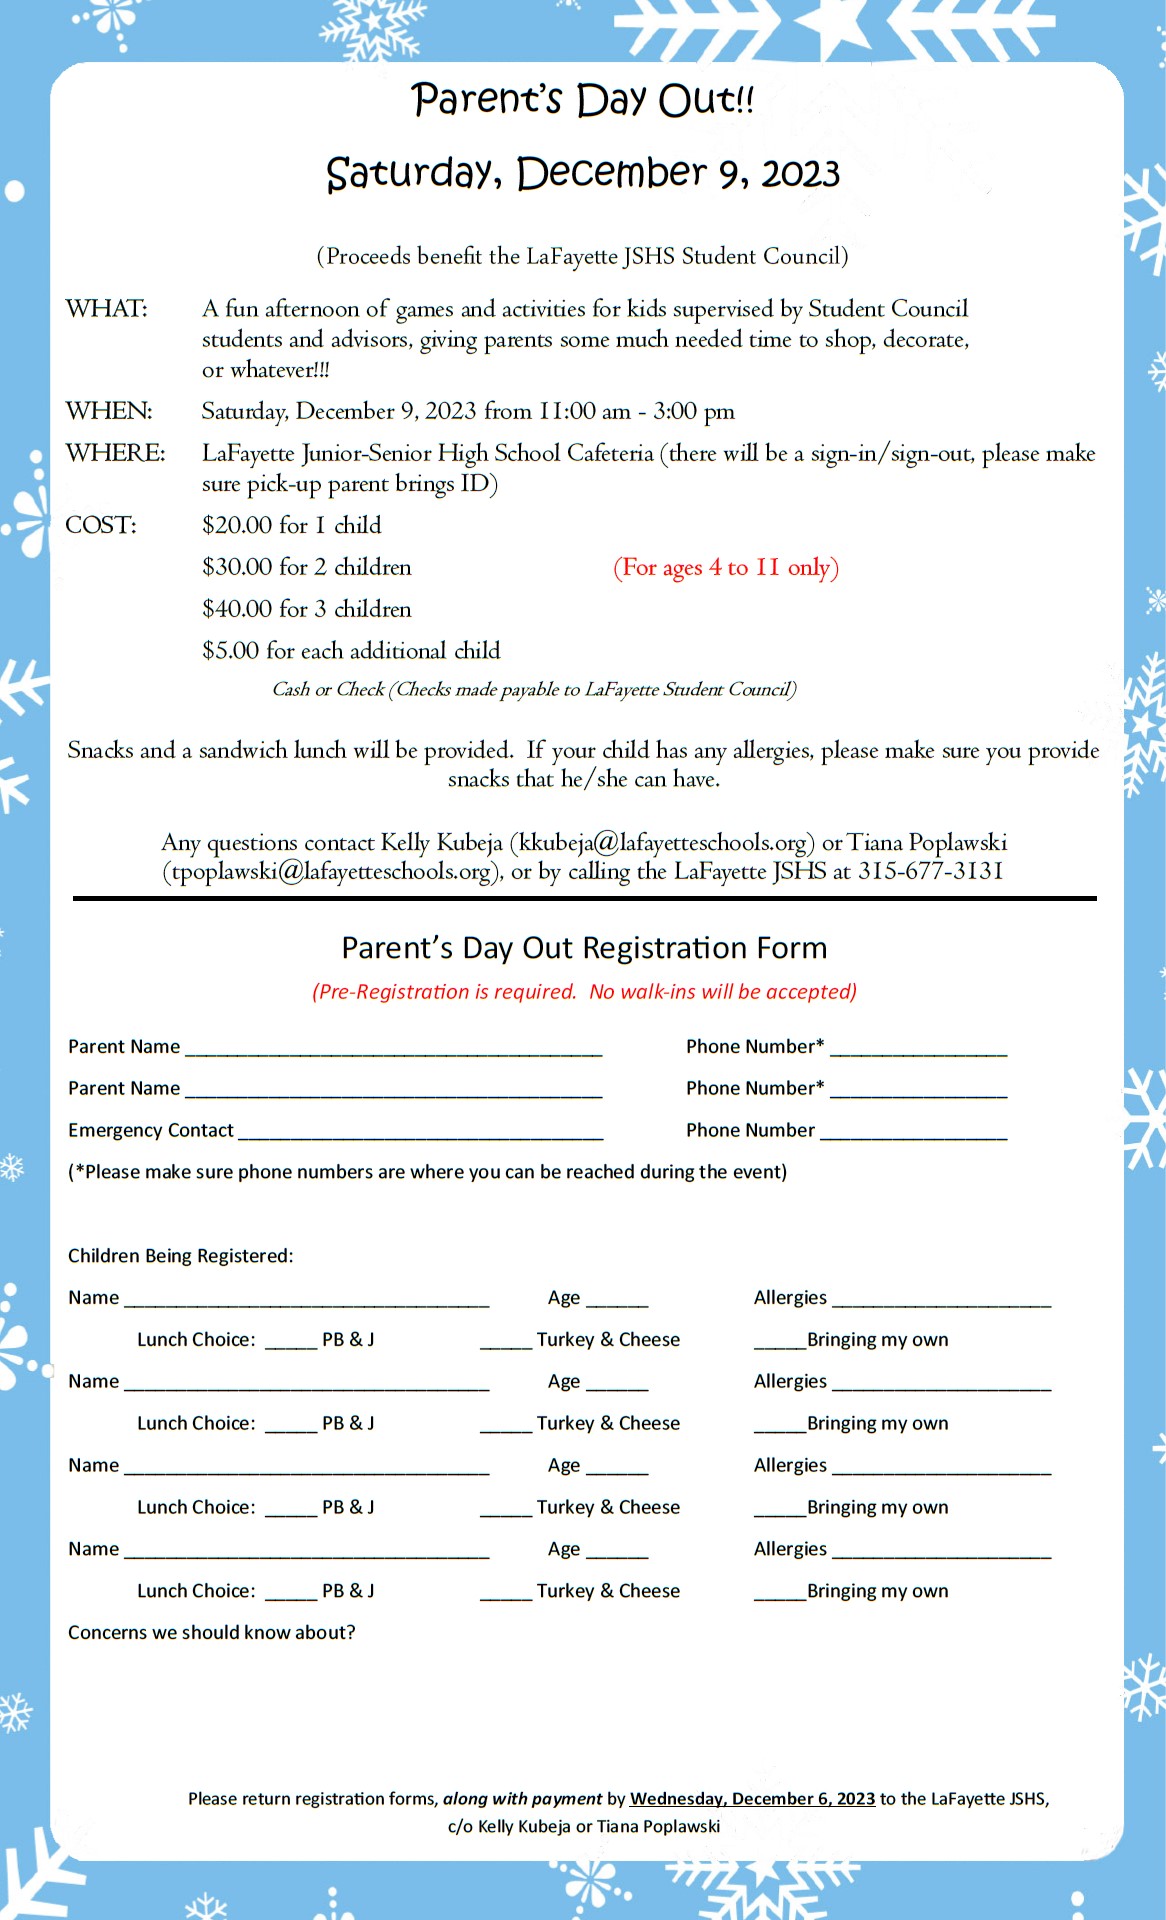 please click here to download parents day out registration form